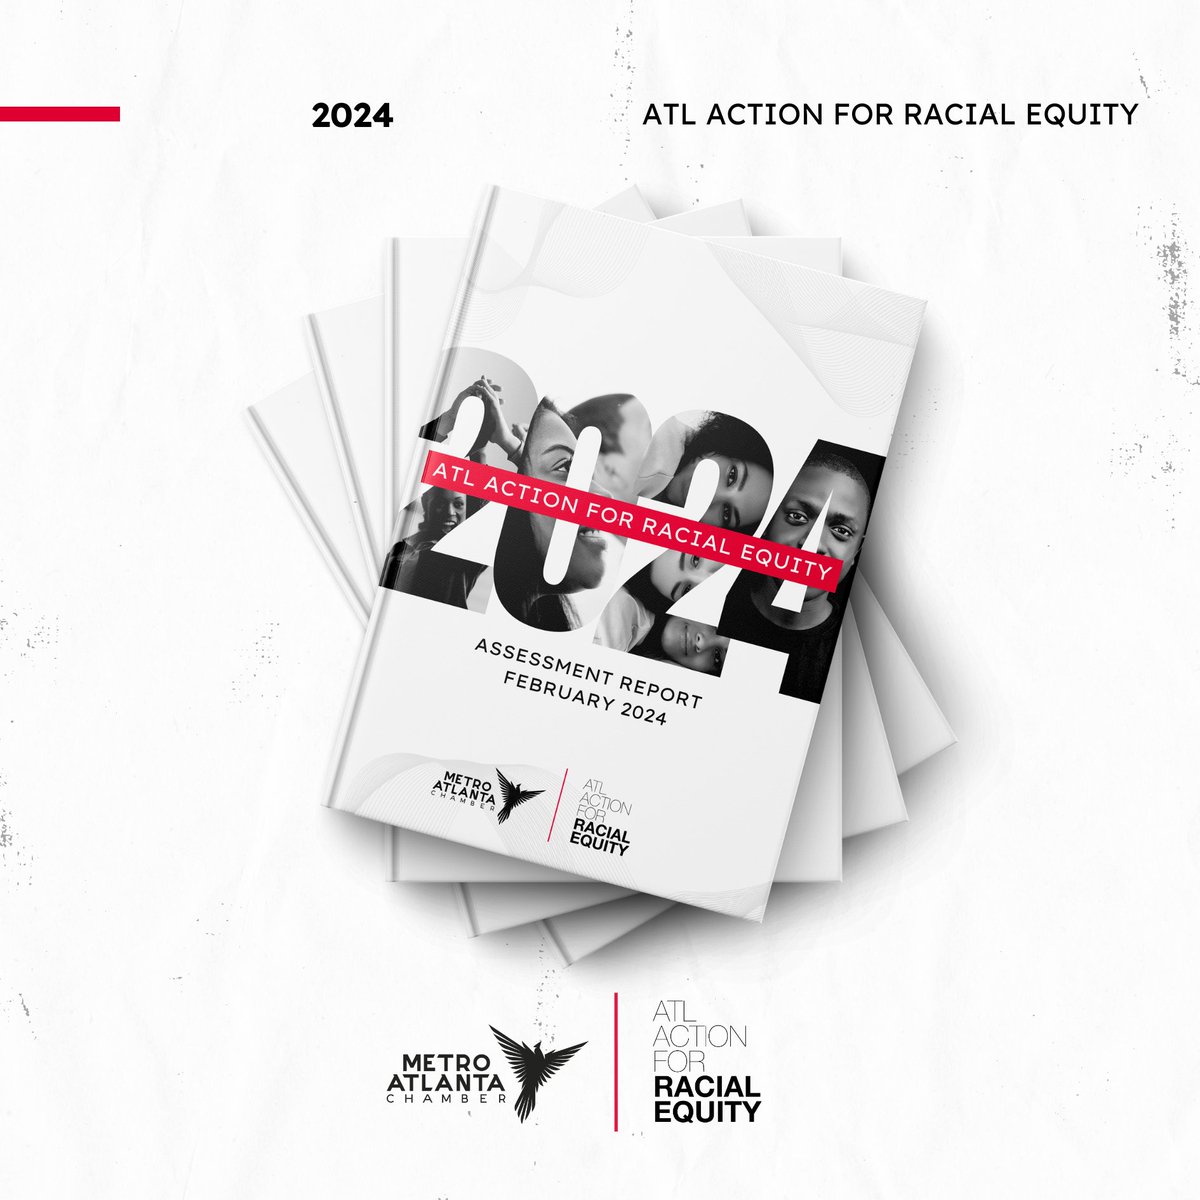 This week the Metro Atlanta Chamber will publish the third year of data marking progress towards greater racial equity in companies across the metro Atlanta region. Check atlracialequity.com tomorrow for the full report!